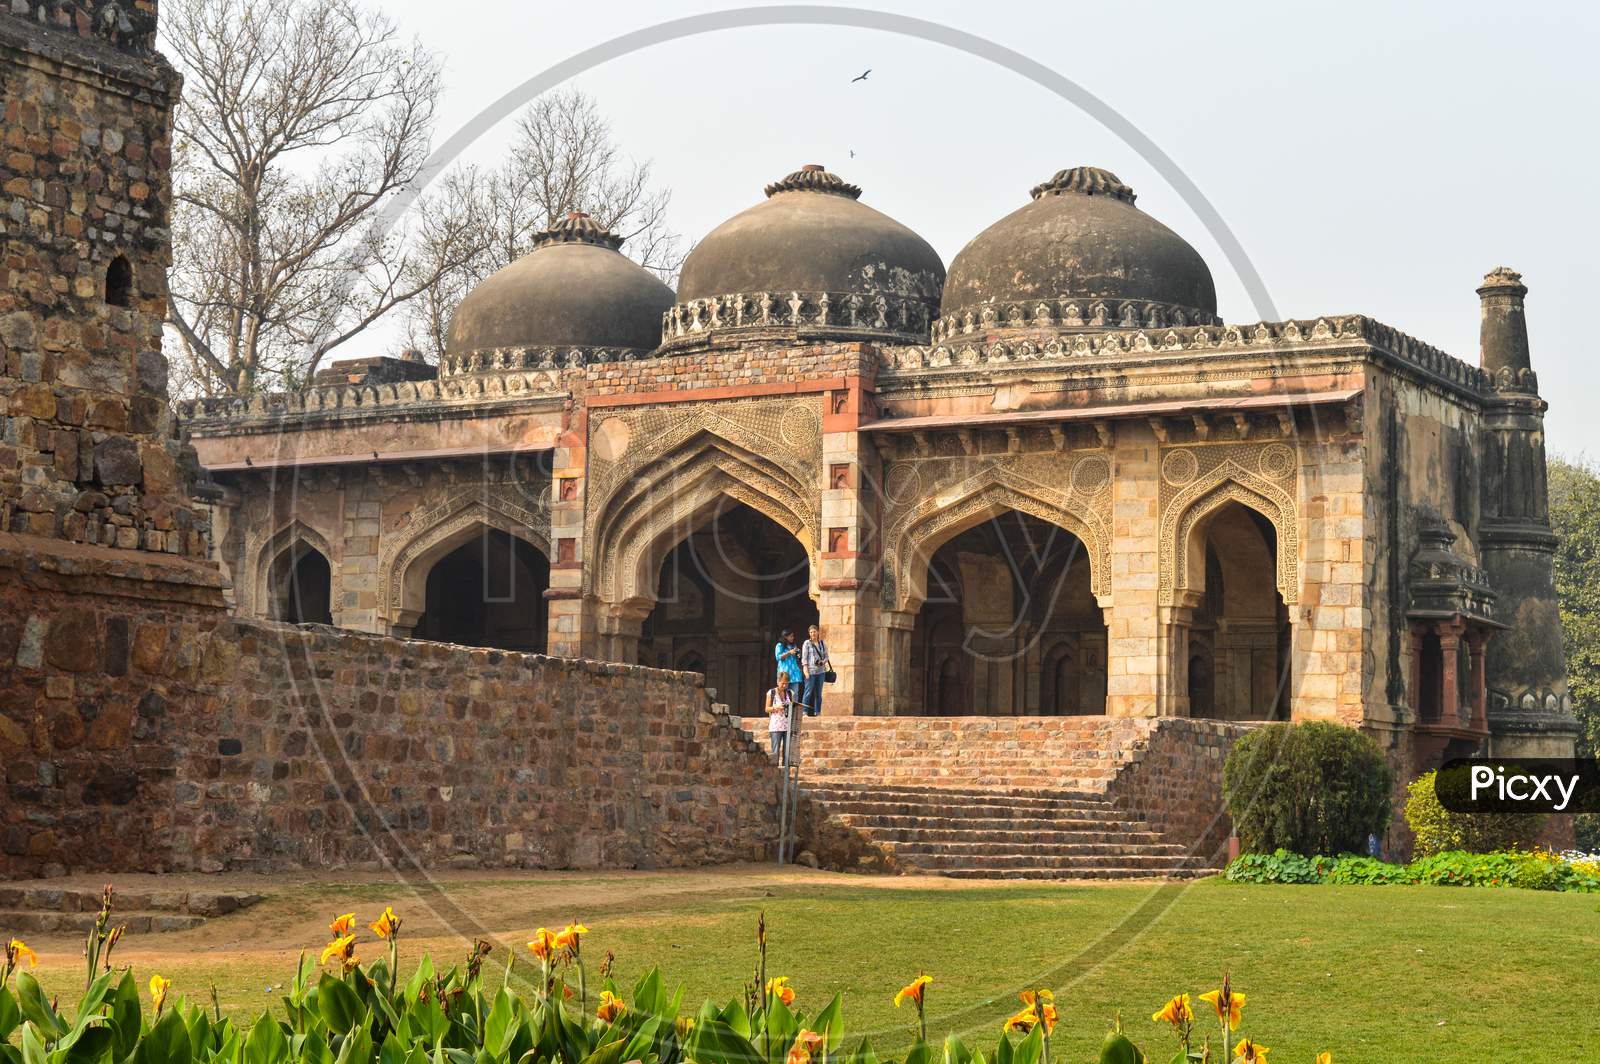 A Bada Gumbad Monument At Lodi Garden Or Lodhi Gardens In A City Park From The Side Of The Lawn At Winter Foggy Morning.